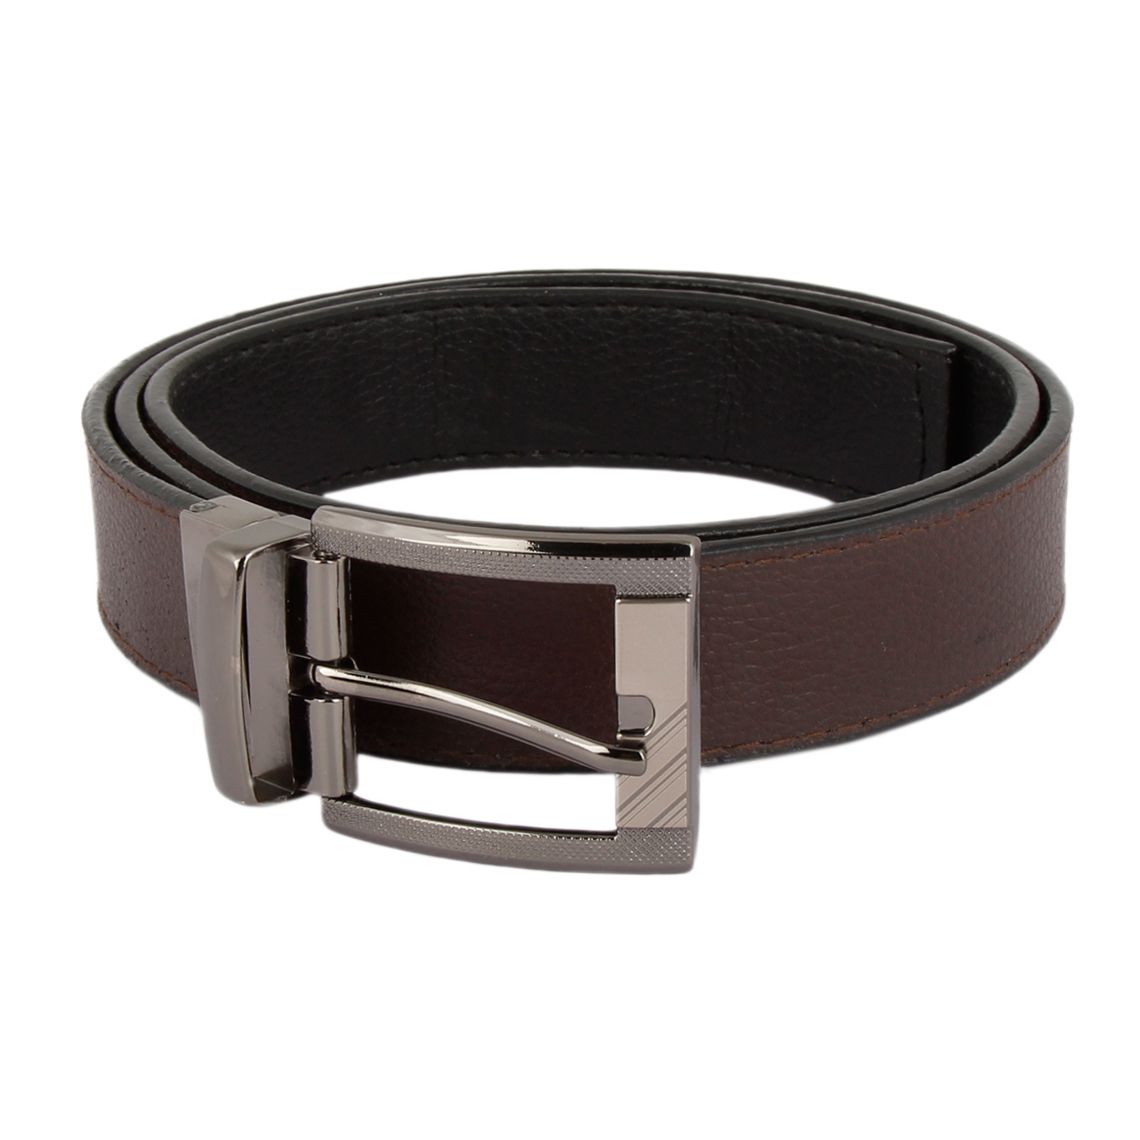 Lurap Black Faux Leather Casual Belts: Buy Online at Low Price in India ...